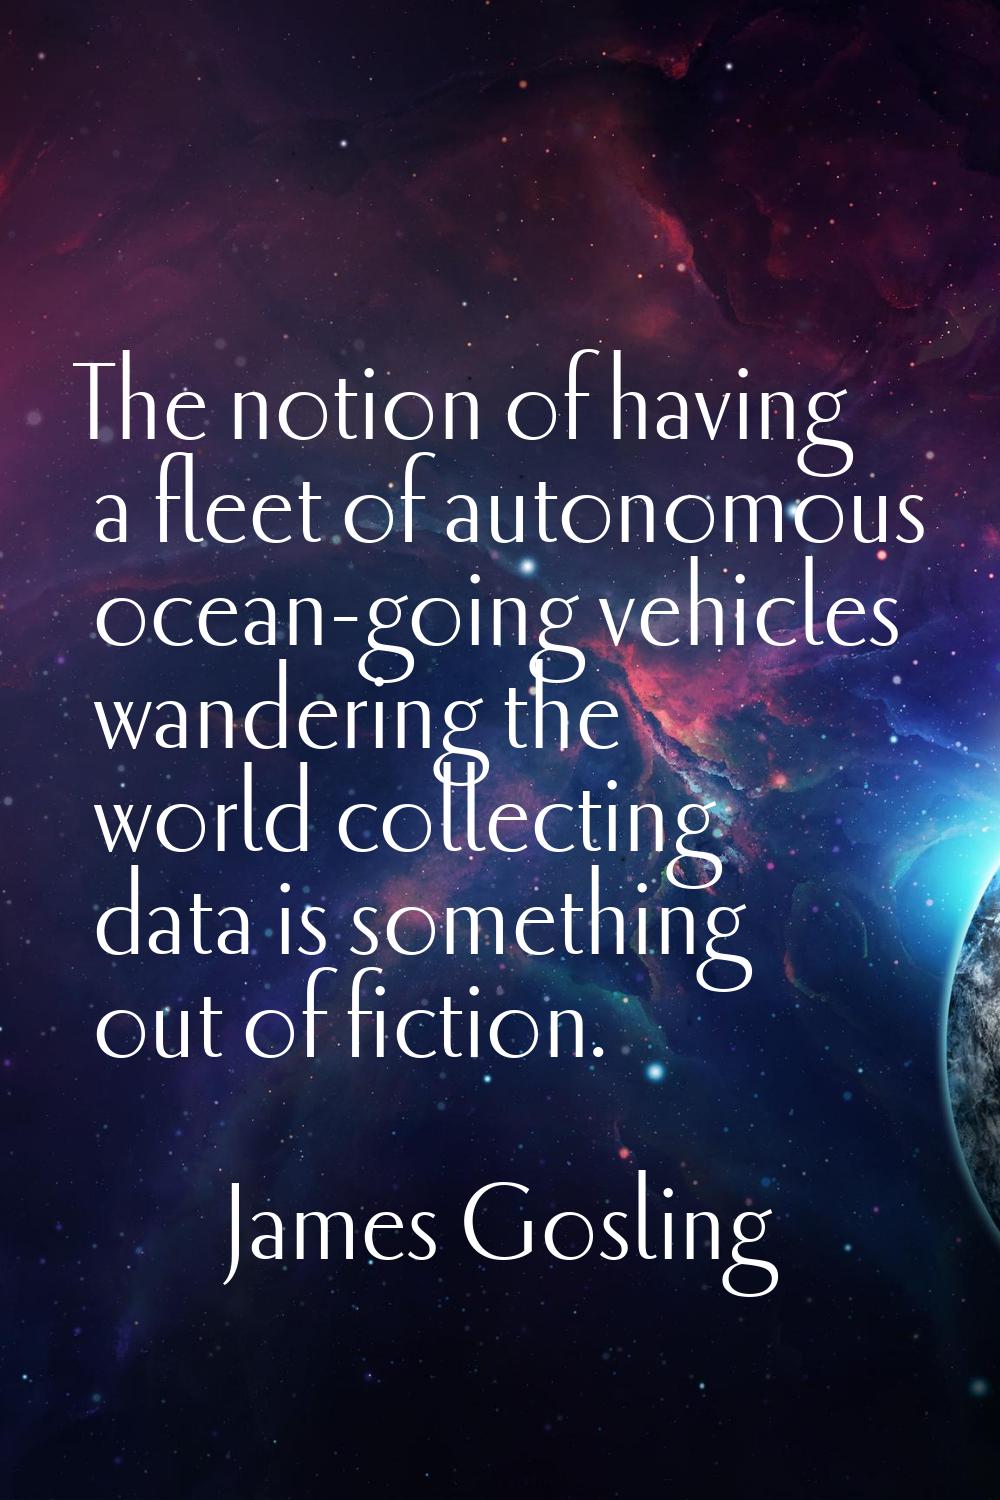 The notion of having a fleet of autonomous ocean-going vehicles wandering the world collecting data